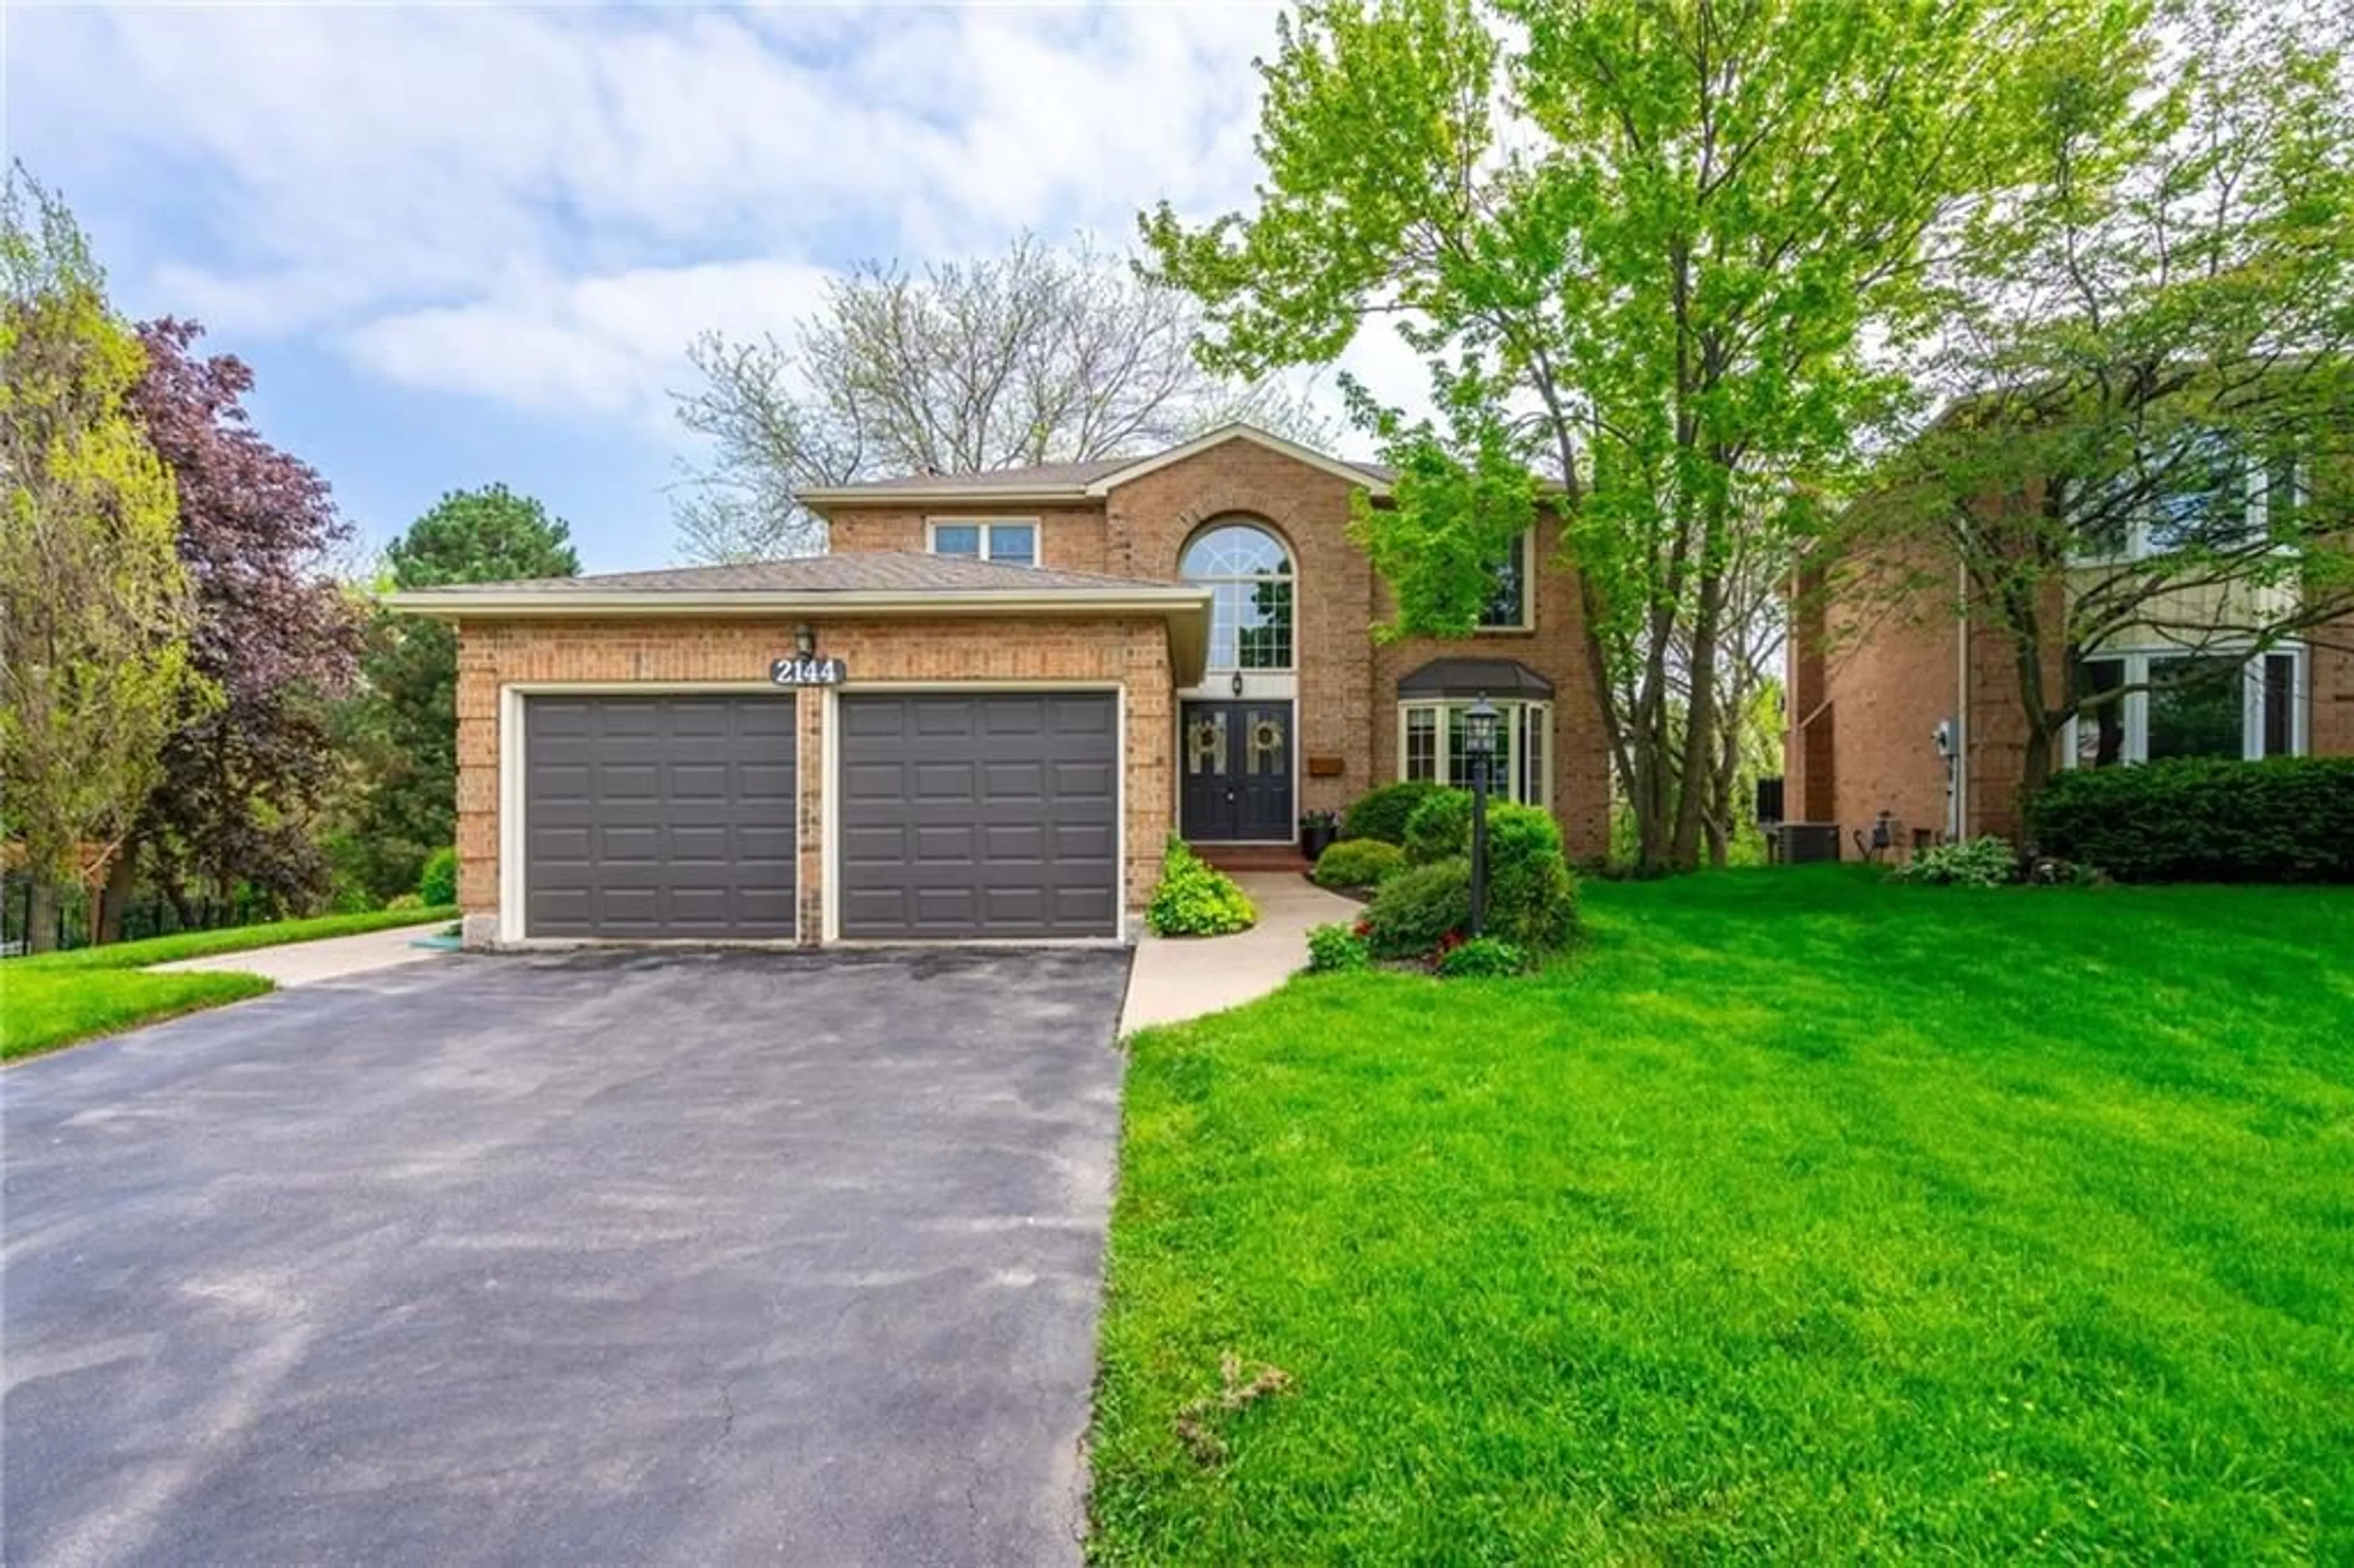 Home with brick exterior material for 2144 WINDING Way, Burlington Ontario L7M 2X9